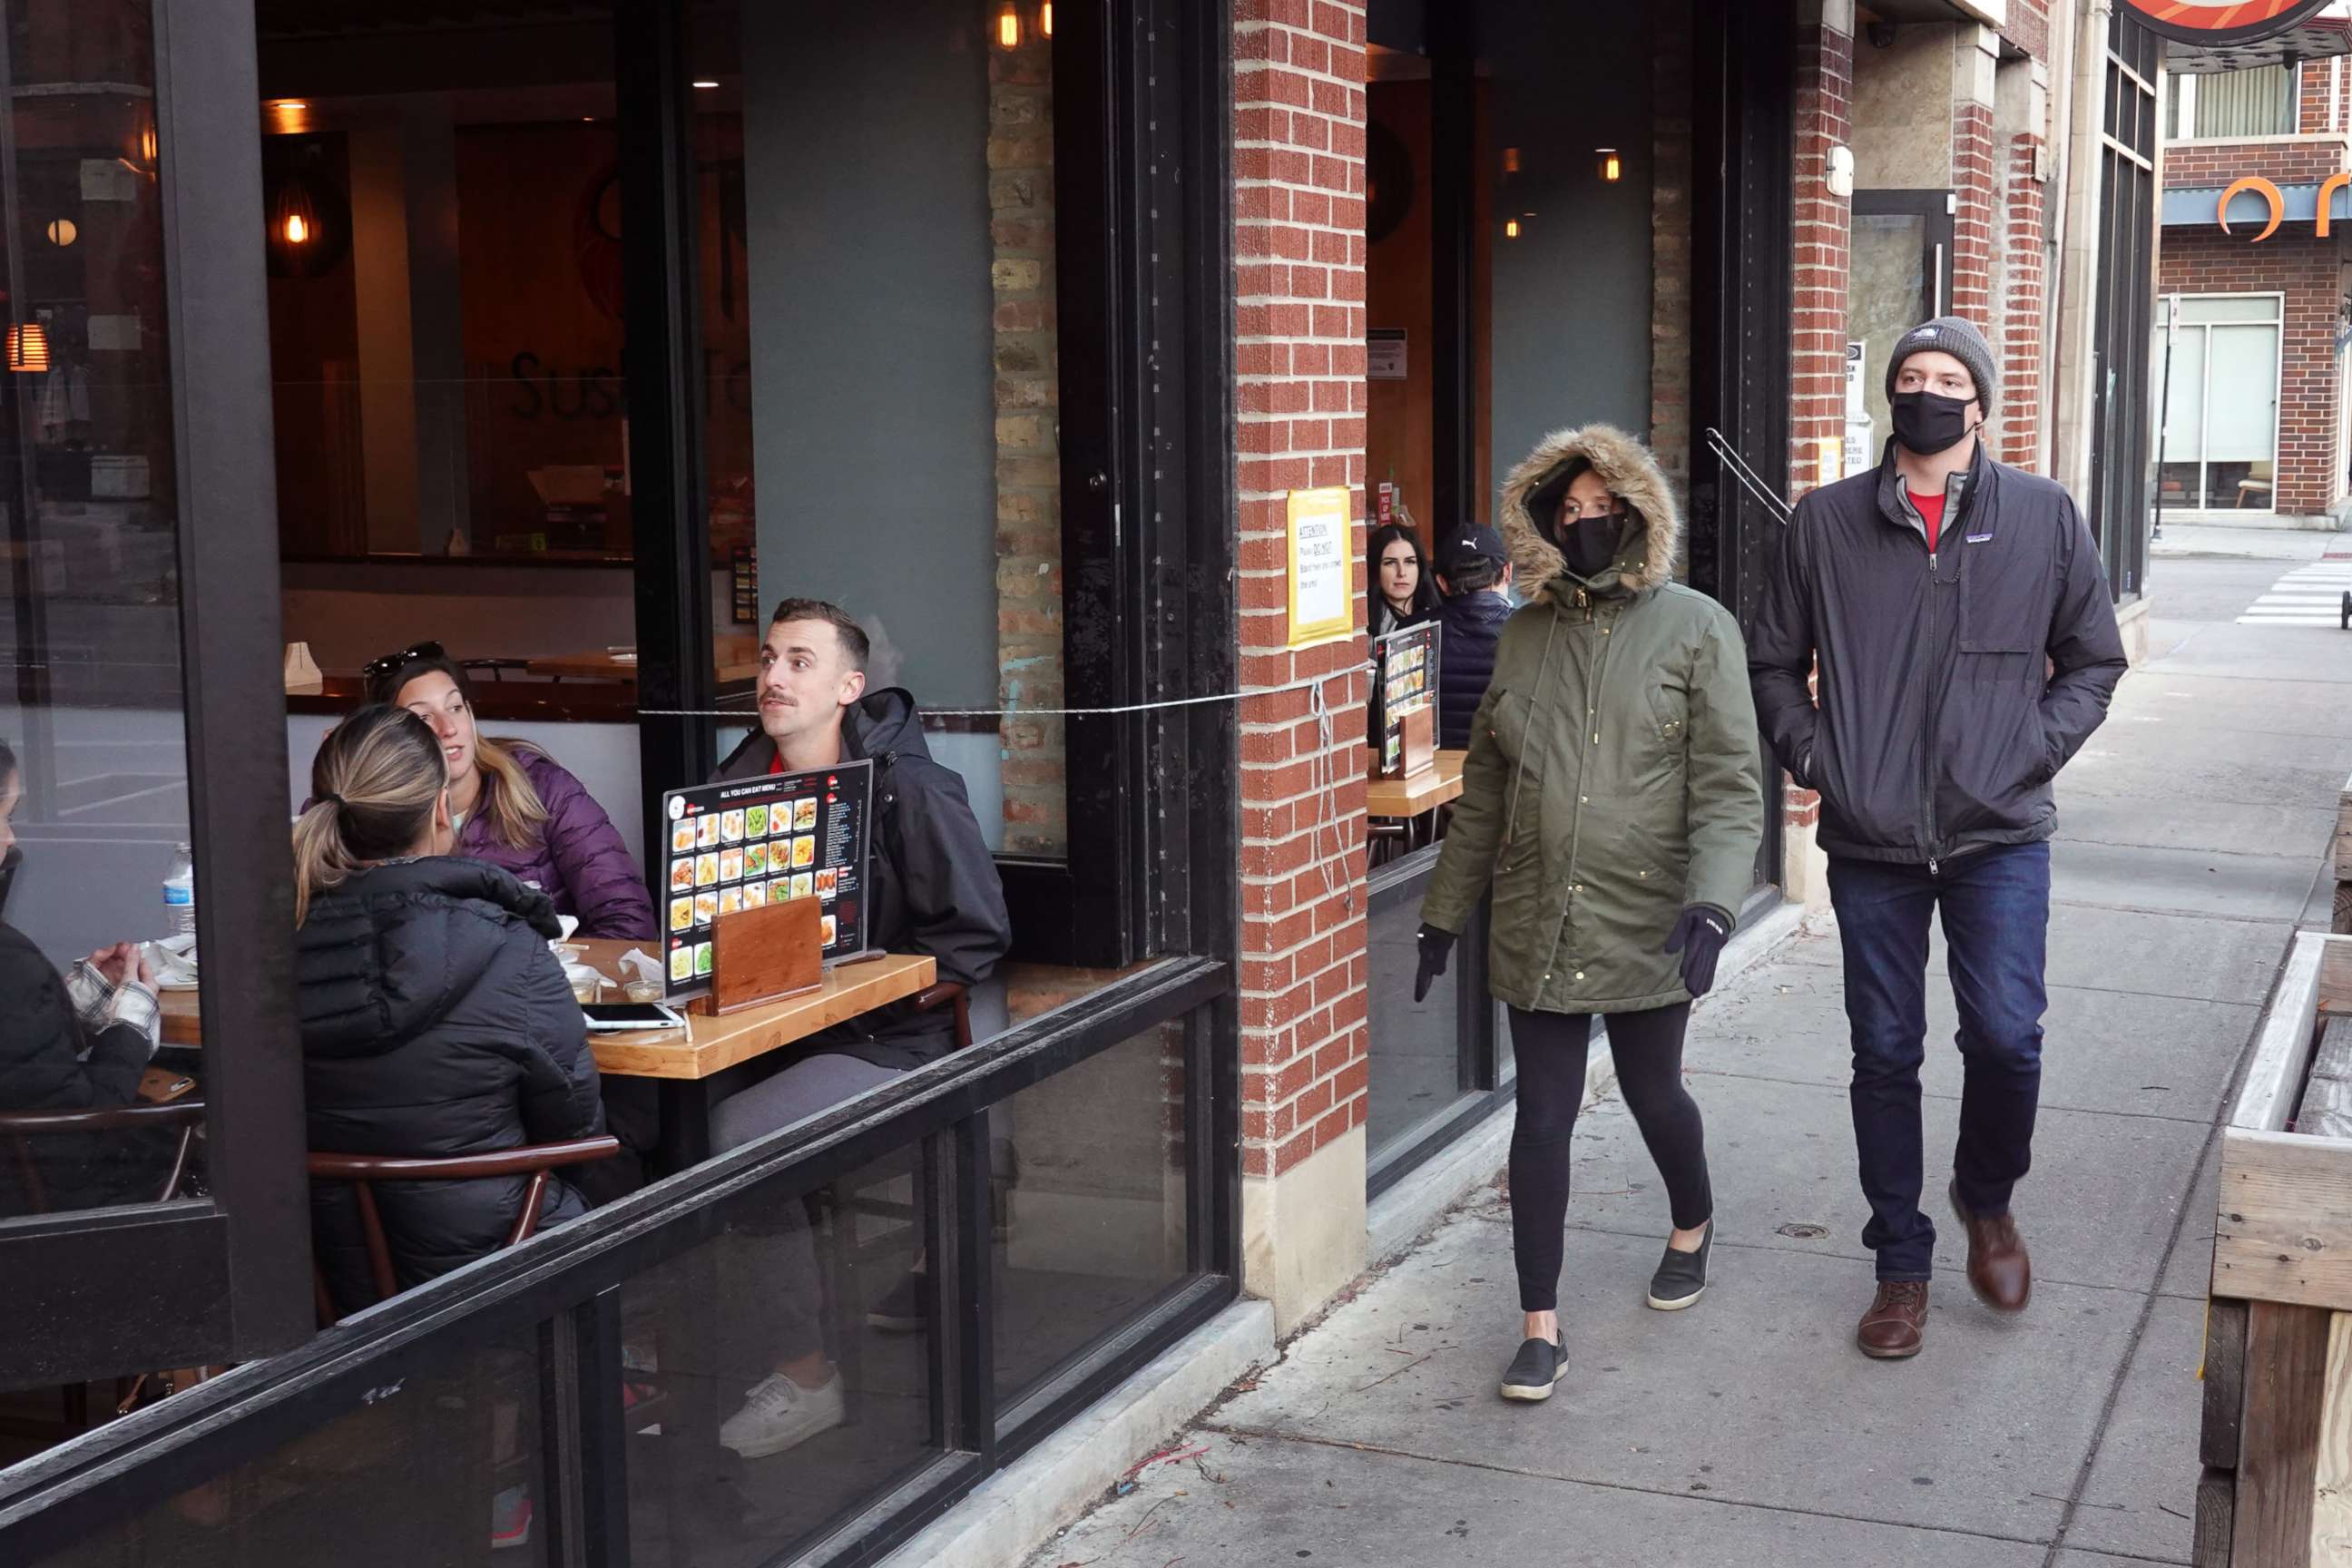 PHOTO: Despite low temperatures, customers continue to patronize restaurants and bars in Chicago, Nov. 11, 2020, in Chicago.